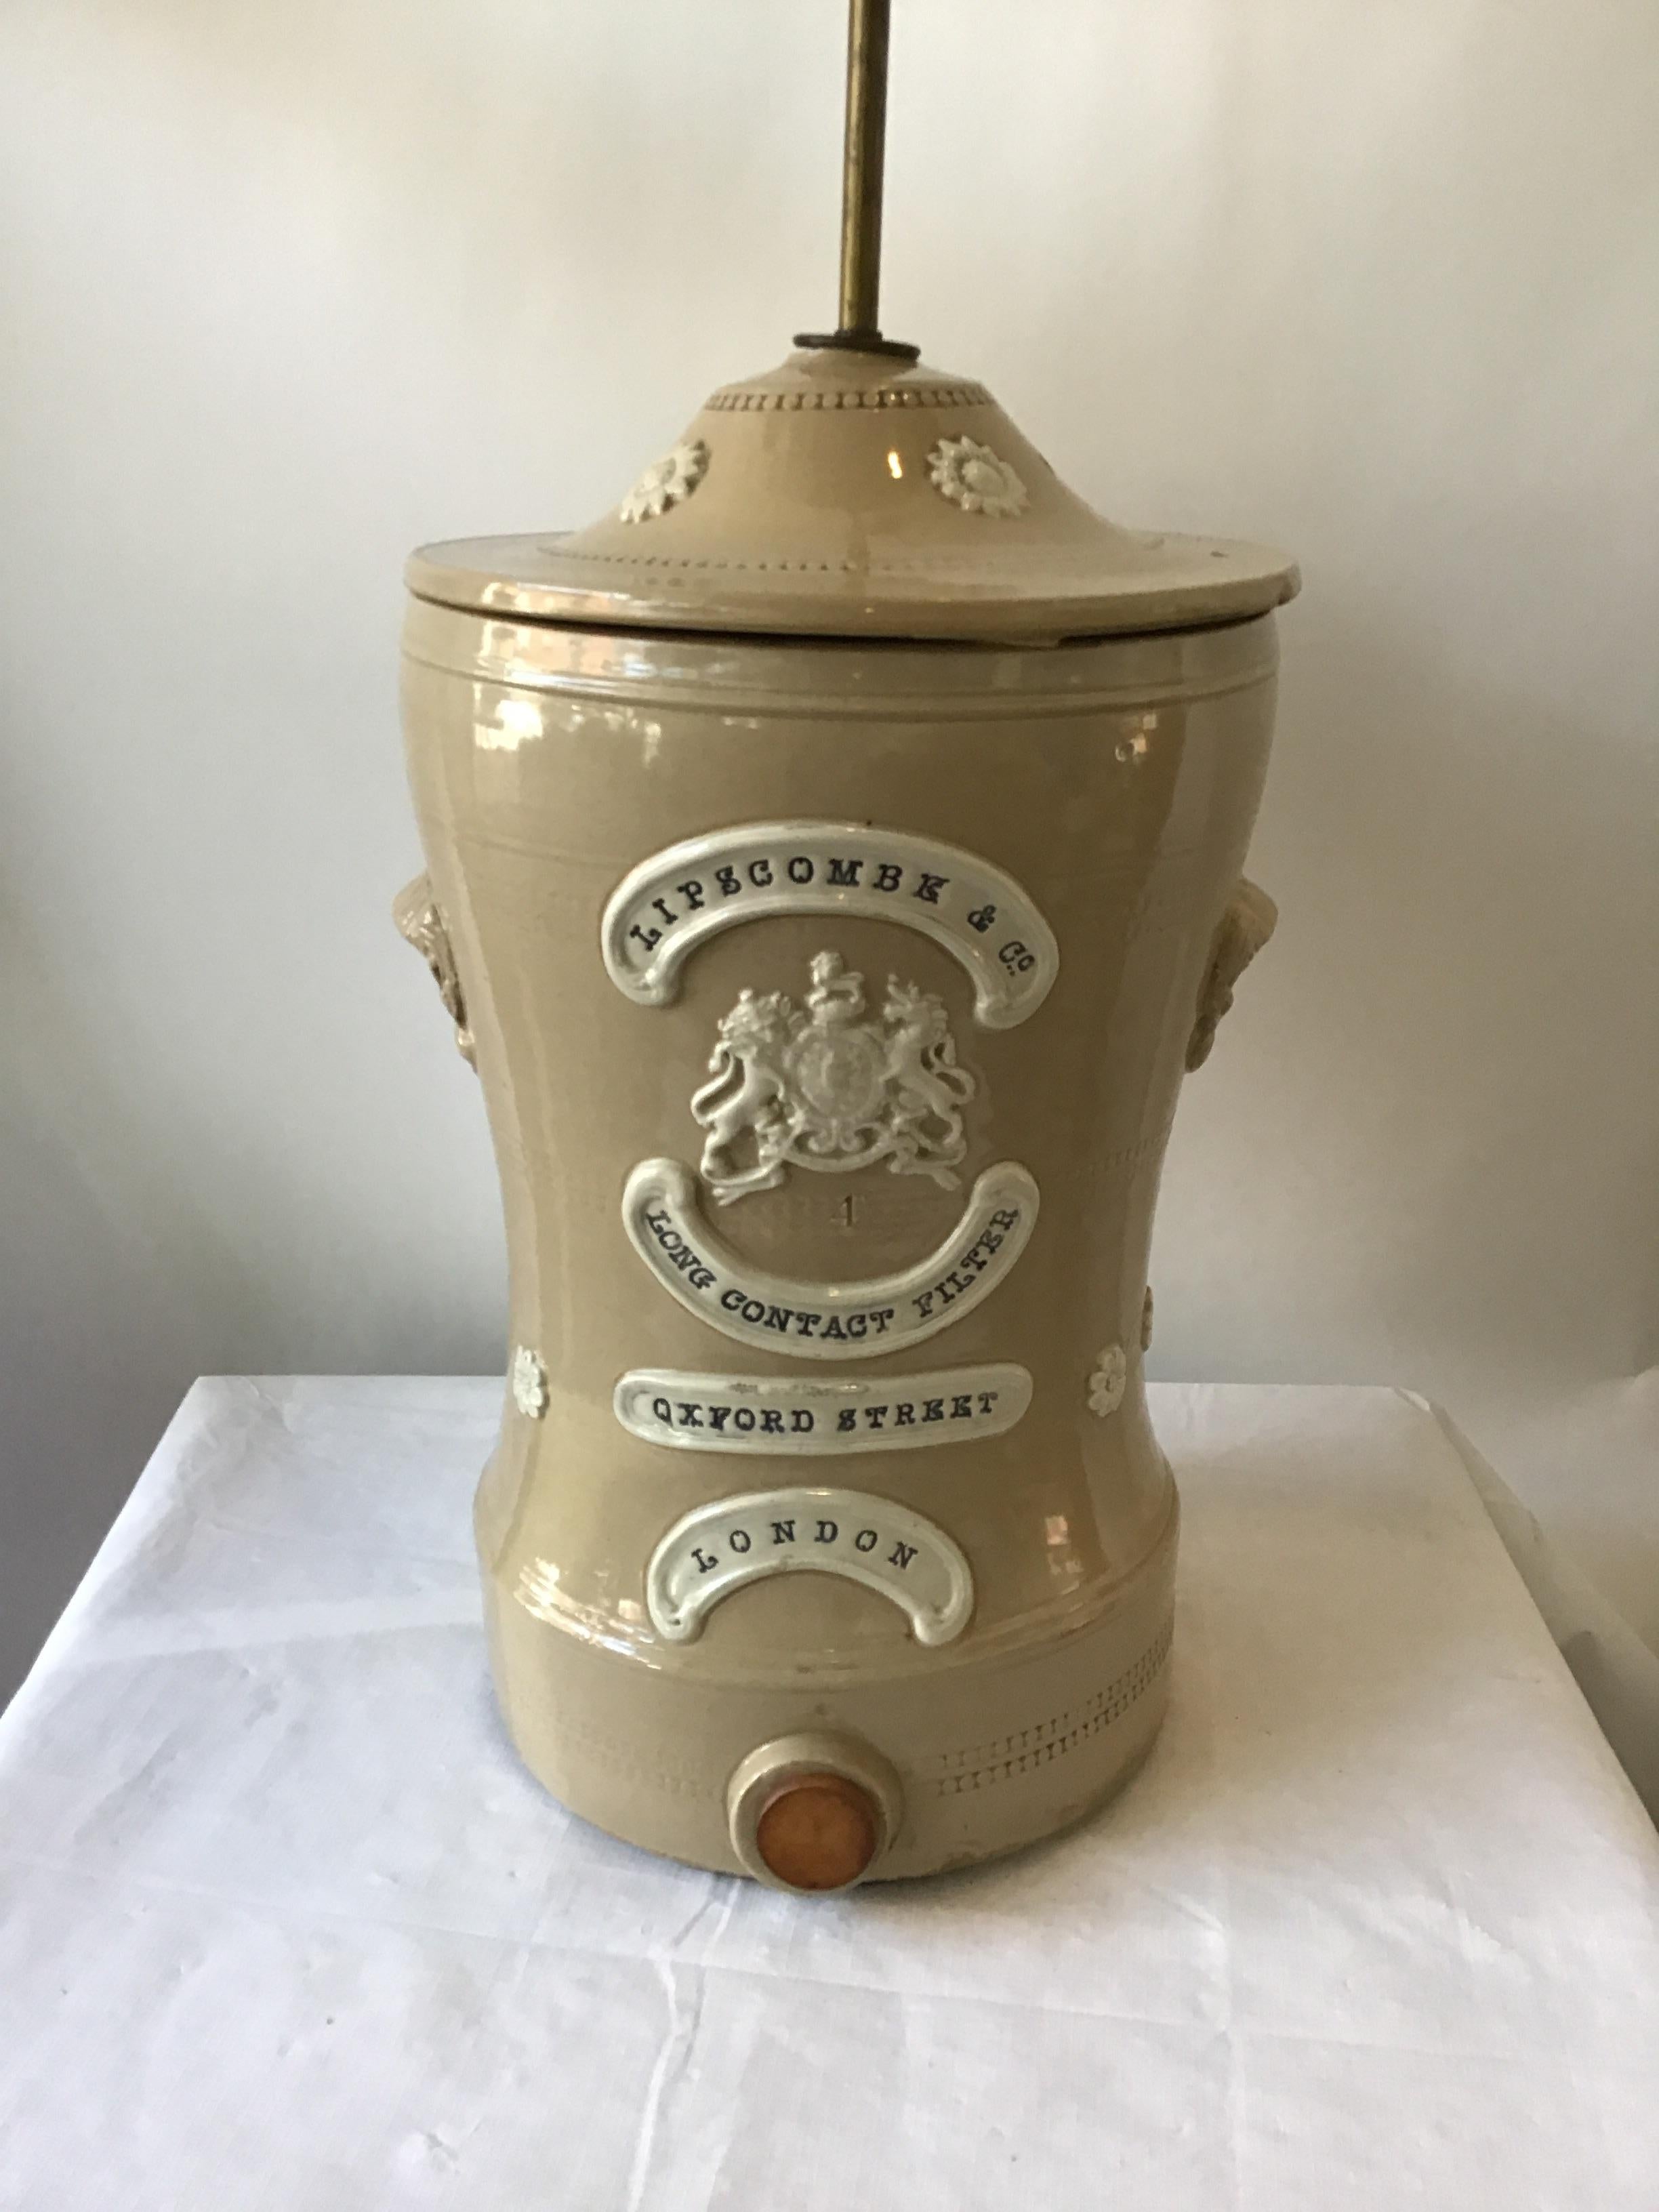 1880s English stoneware water filter turned into a lamp. These filters were used to soften hard water. Made by Lipscombe and Co. in London.